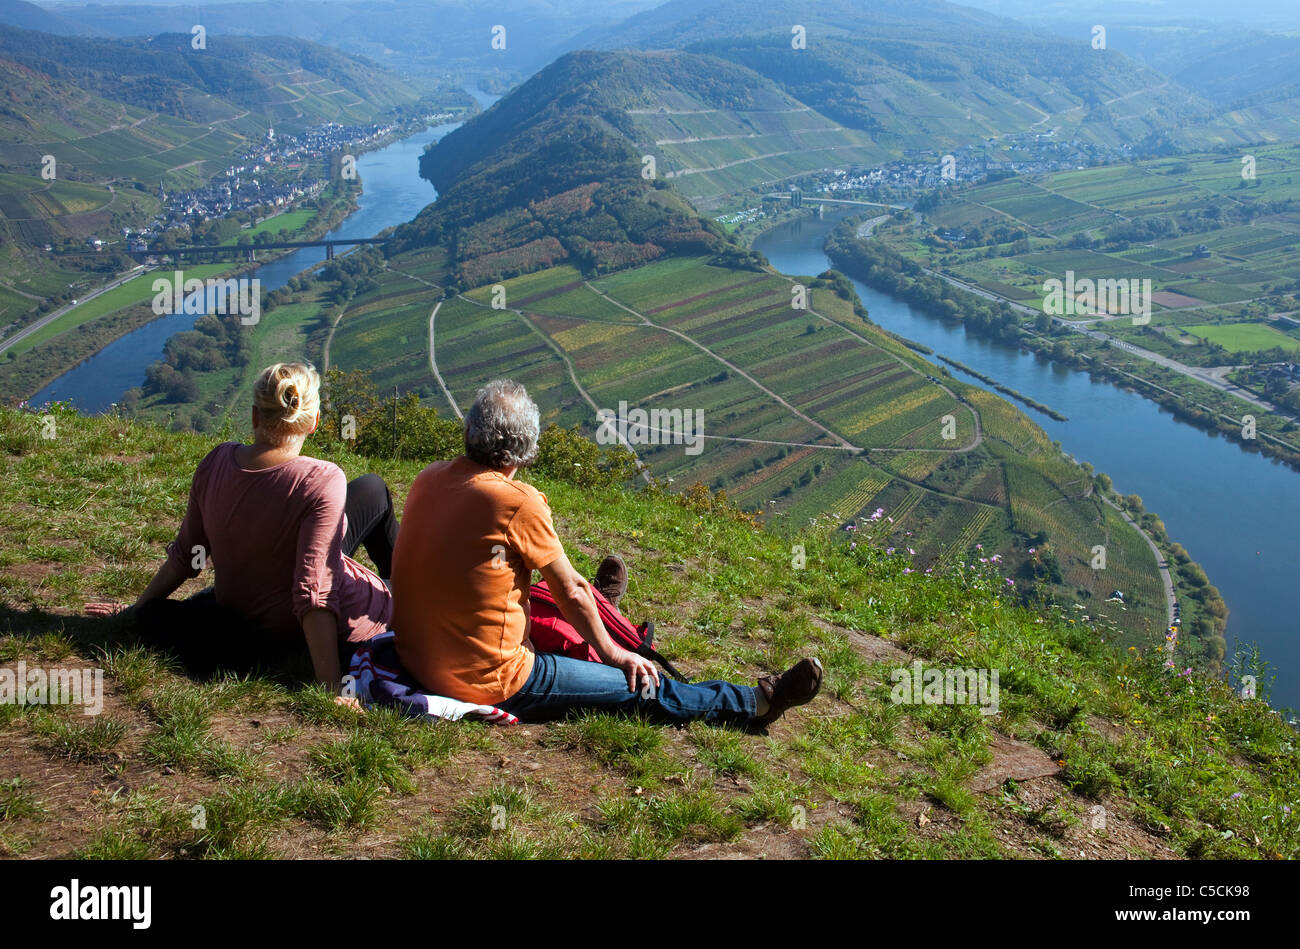 Wanderer an der Moselschleife bei Bremm Herbst Mittelmosel, Loop, curve of the Moselle river near the village Bremm Stock Photo